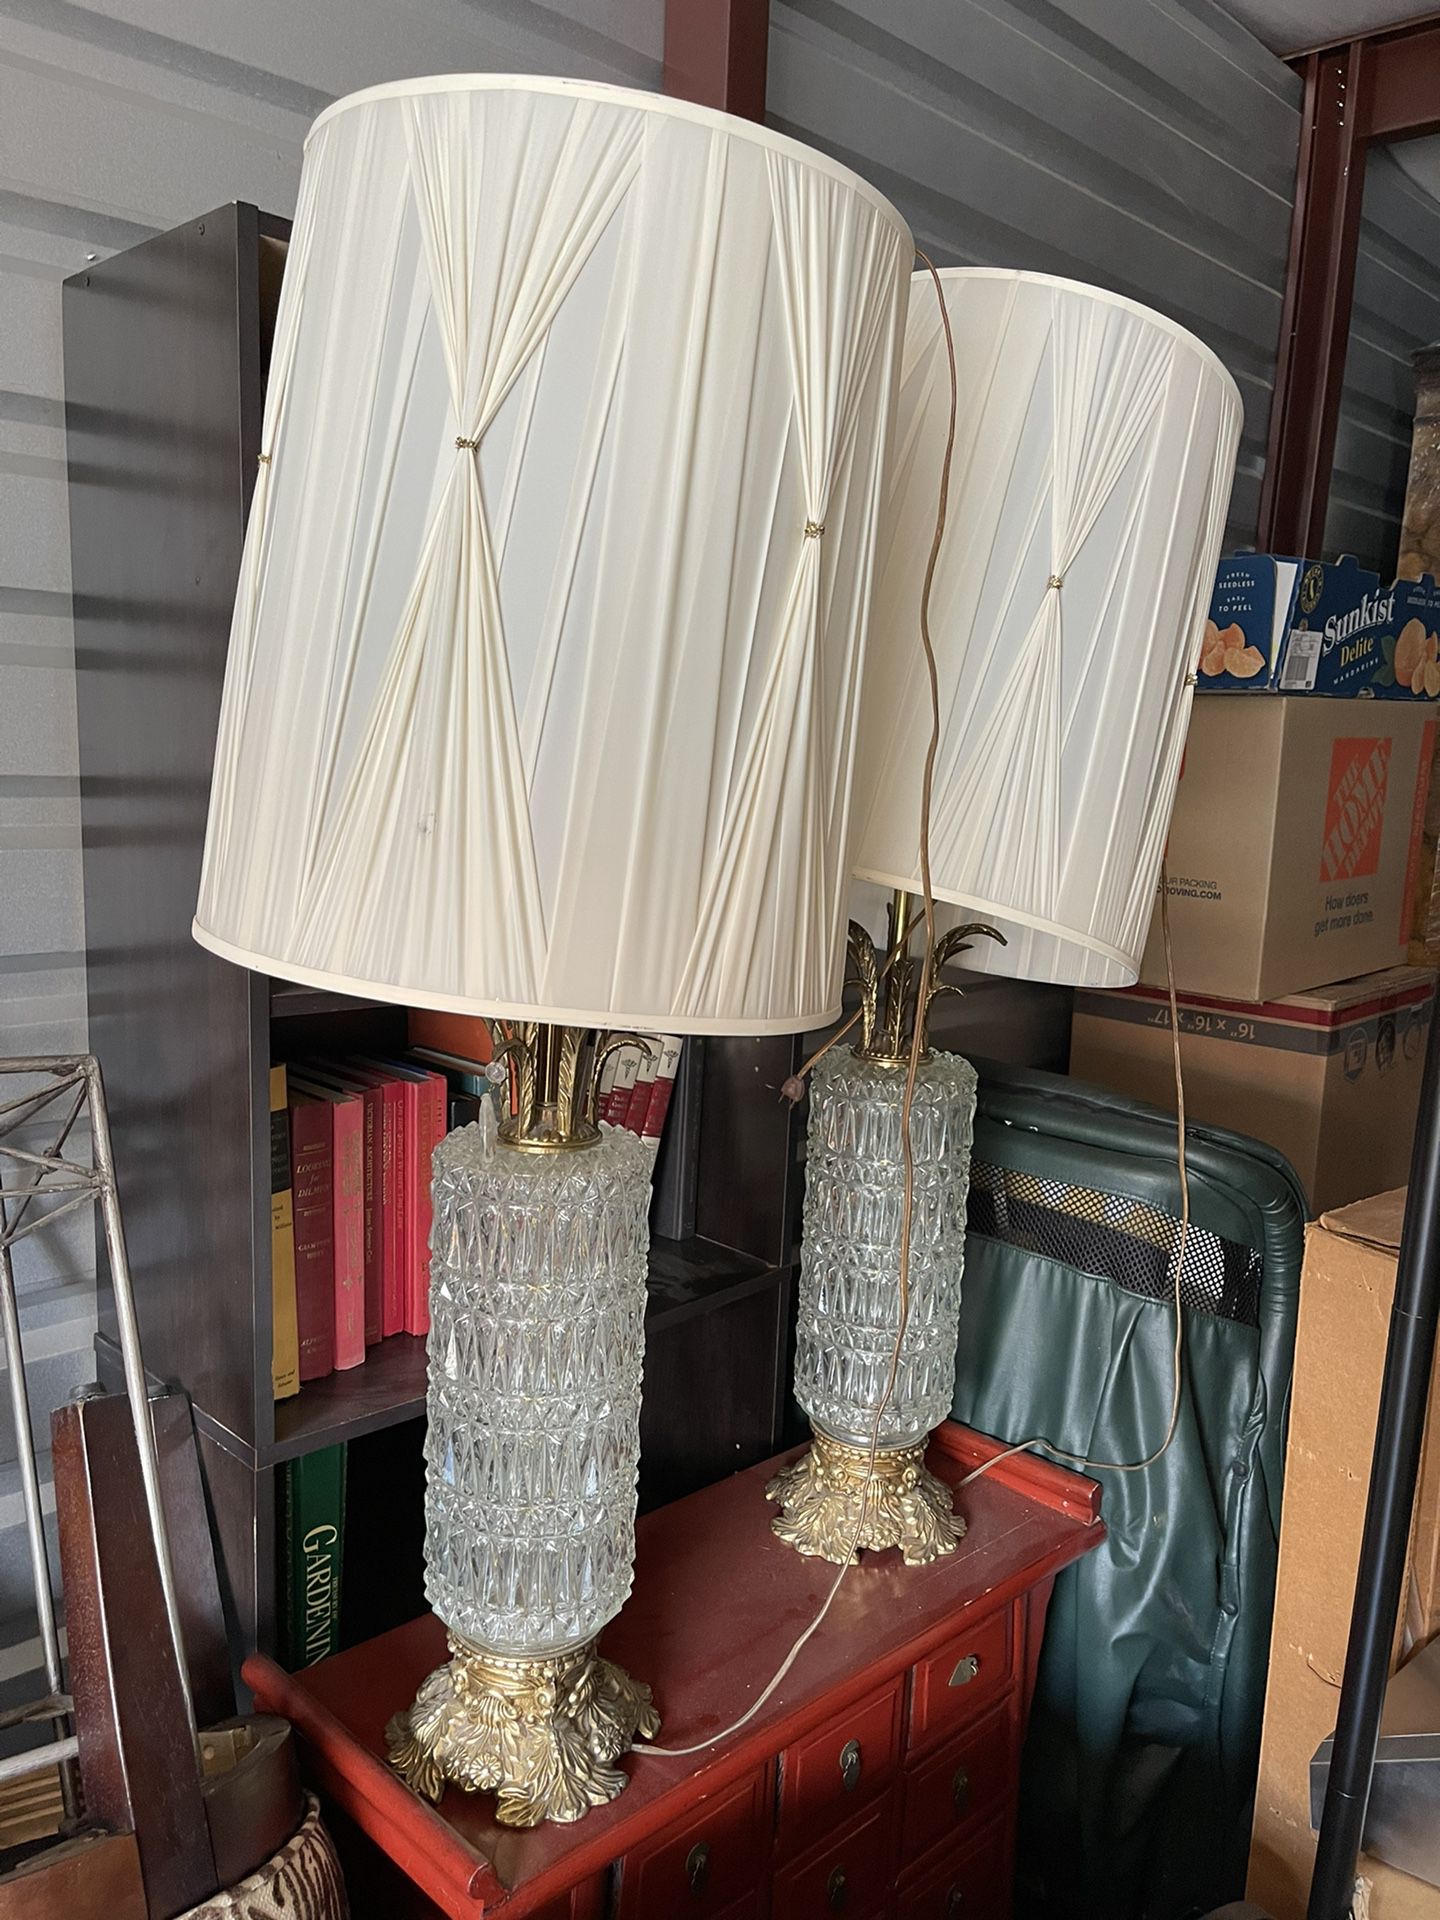 Pair Of Vintage Glass Lamps  